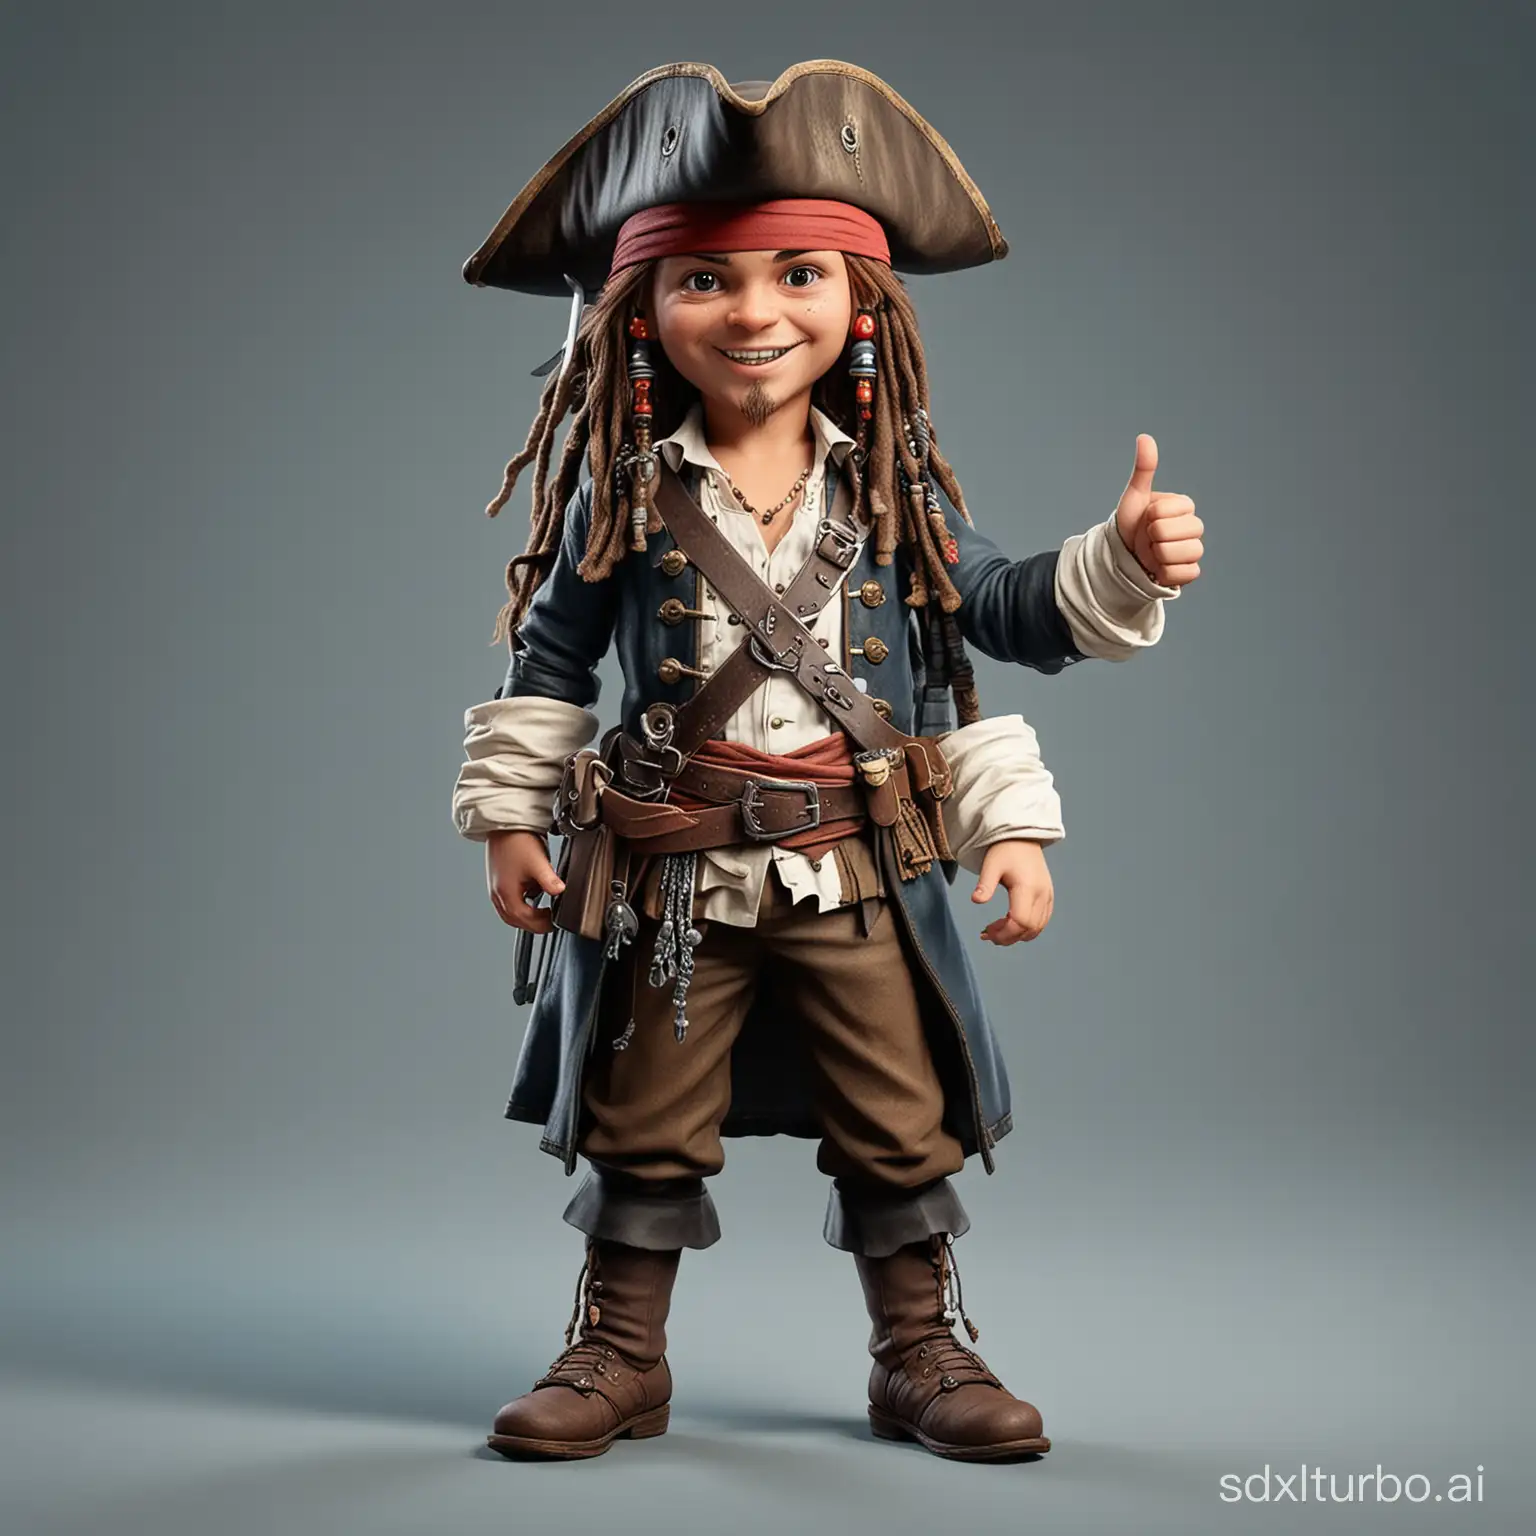 Cheerful-Child-Captain-Jack-Sparrow-Giving-Thumbs-Up-Pirate-Game-Character-Illustration